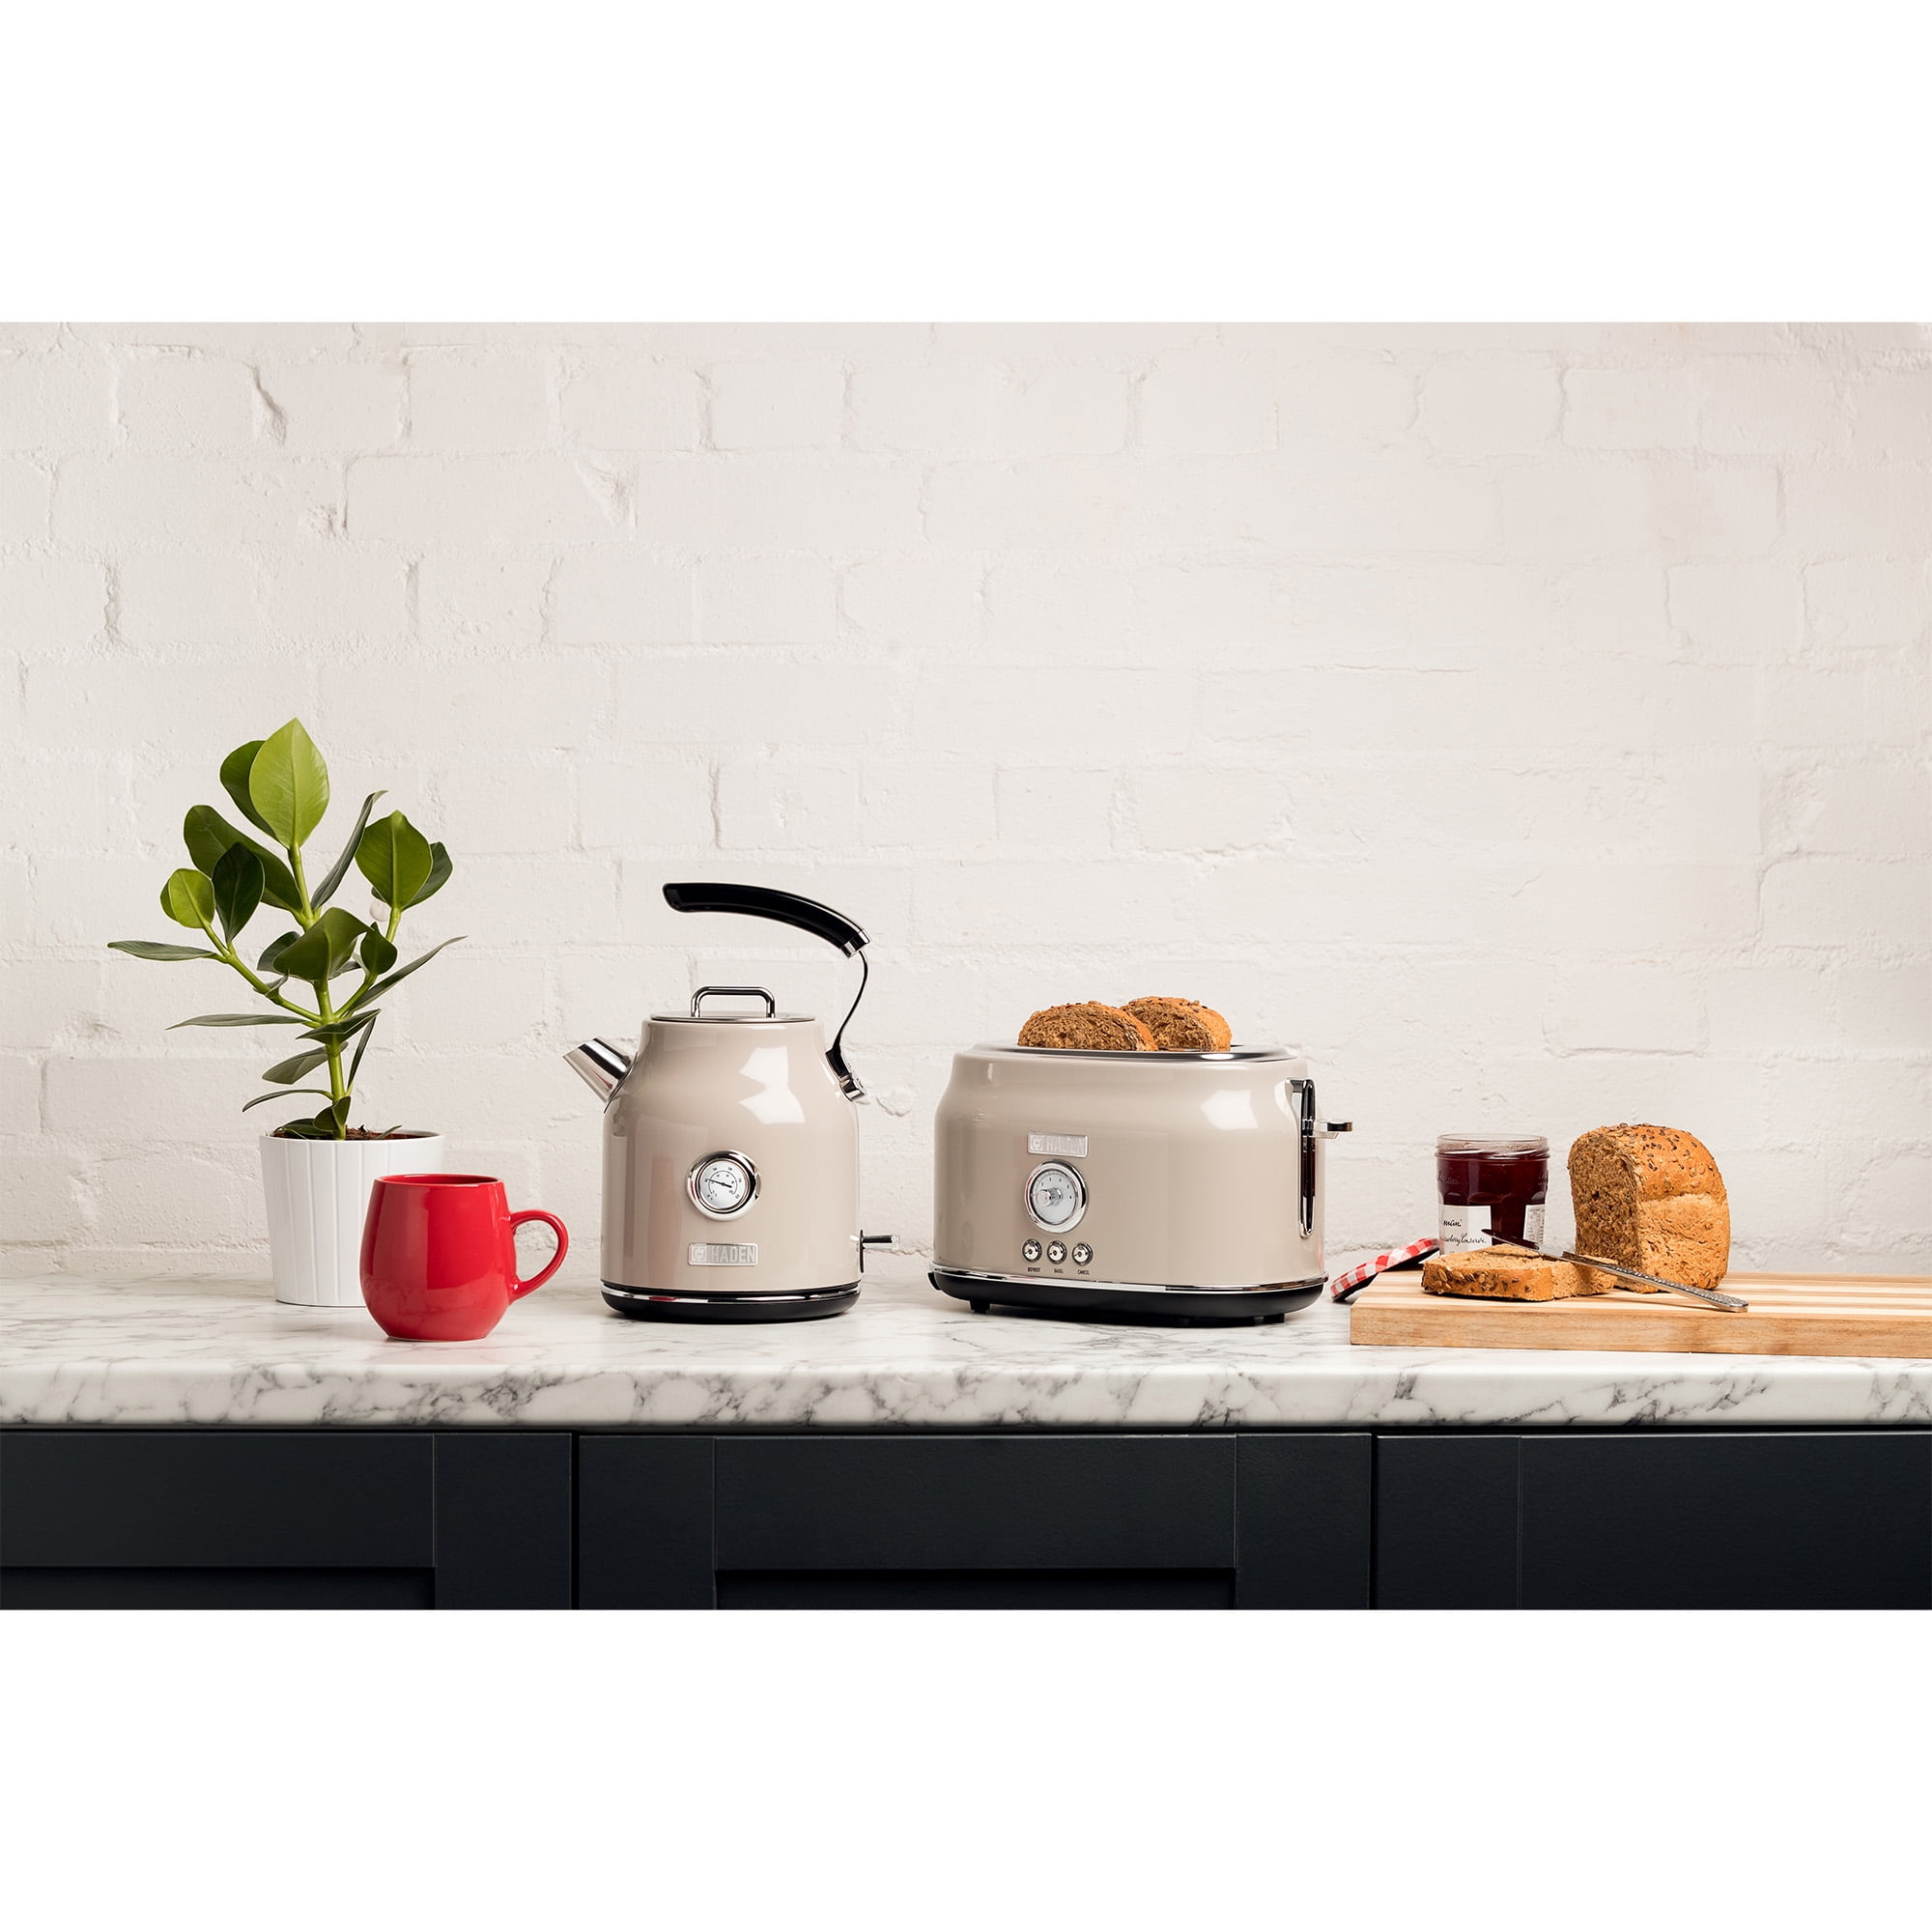 Haden Dorset 1.7 Liter Cordless Electric Kettle and 4 Slice Bread Toaster,  Red, 1 Piece - Fred Meyer